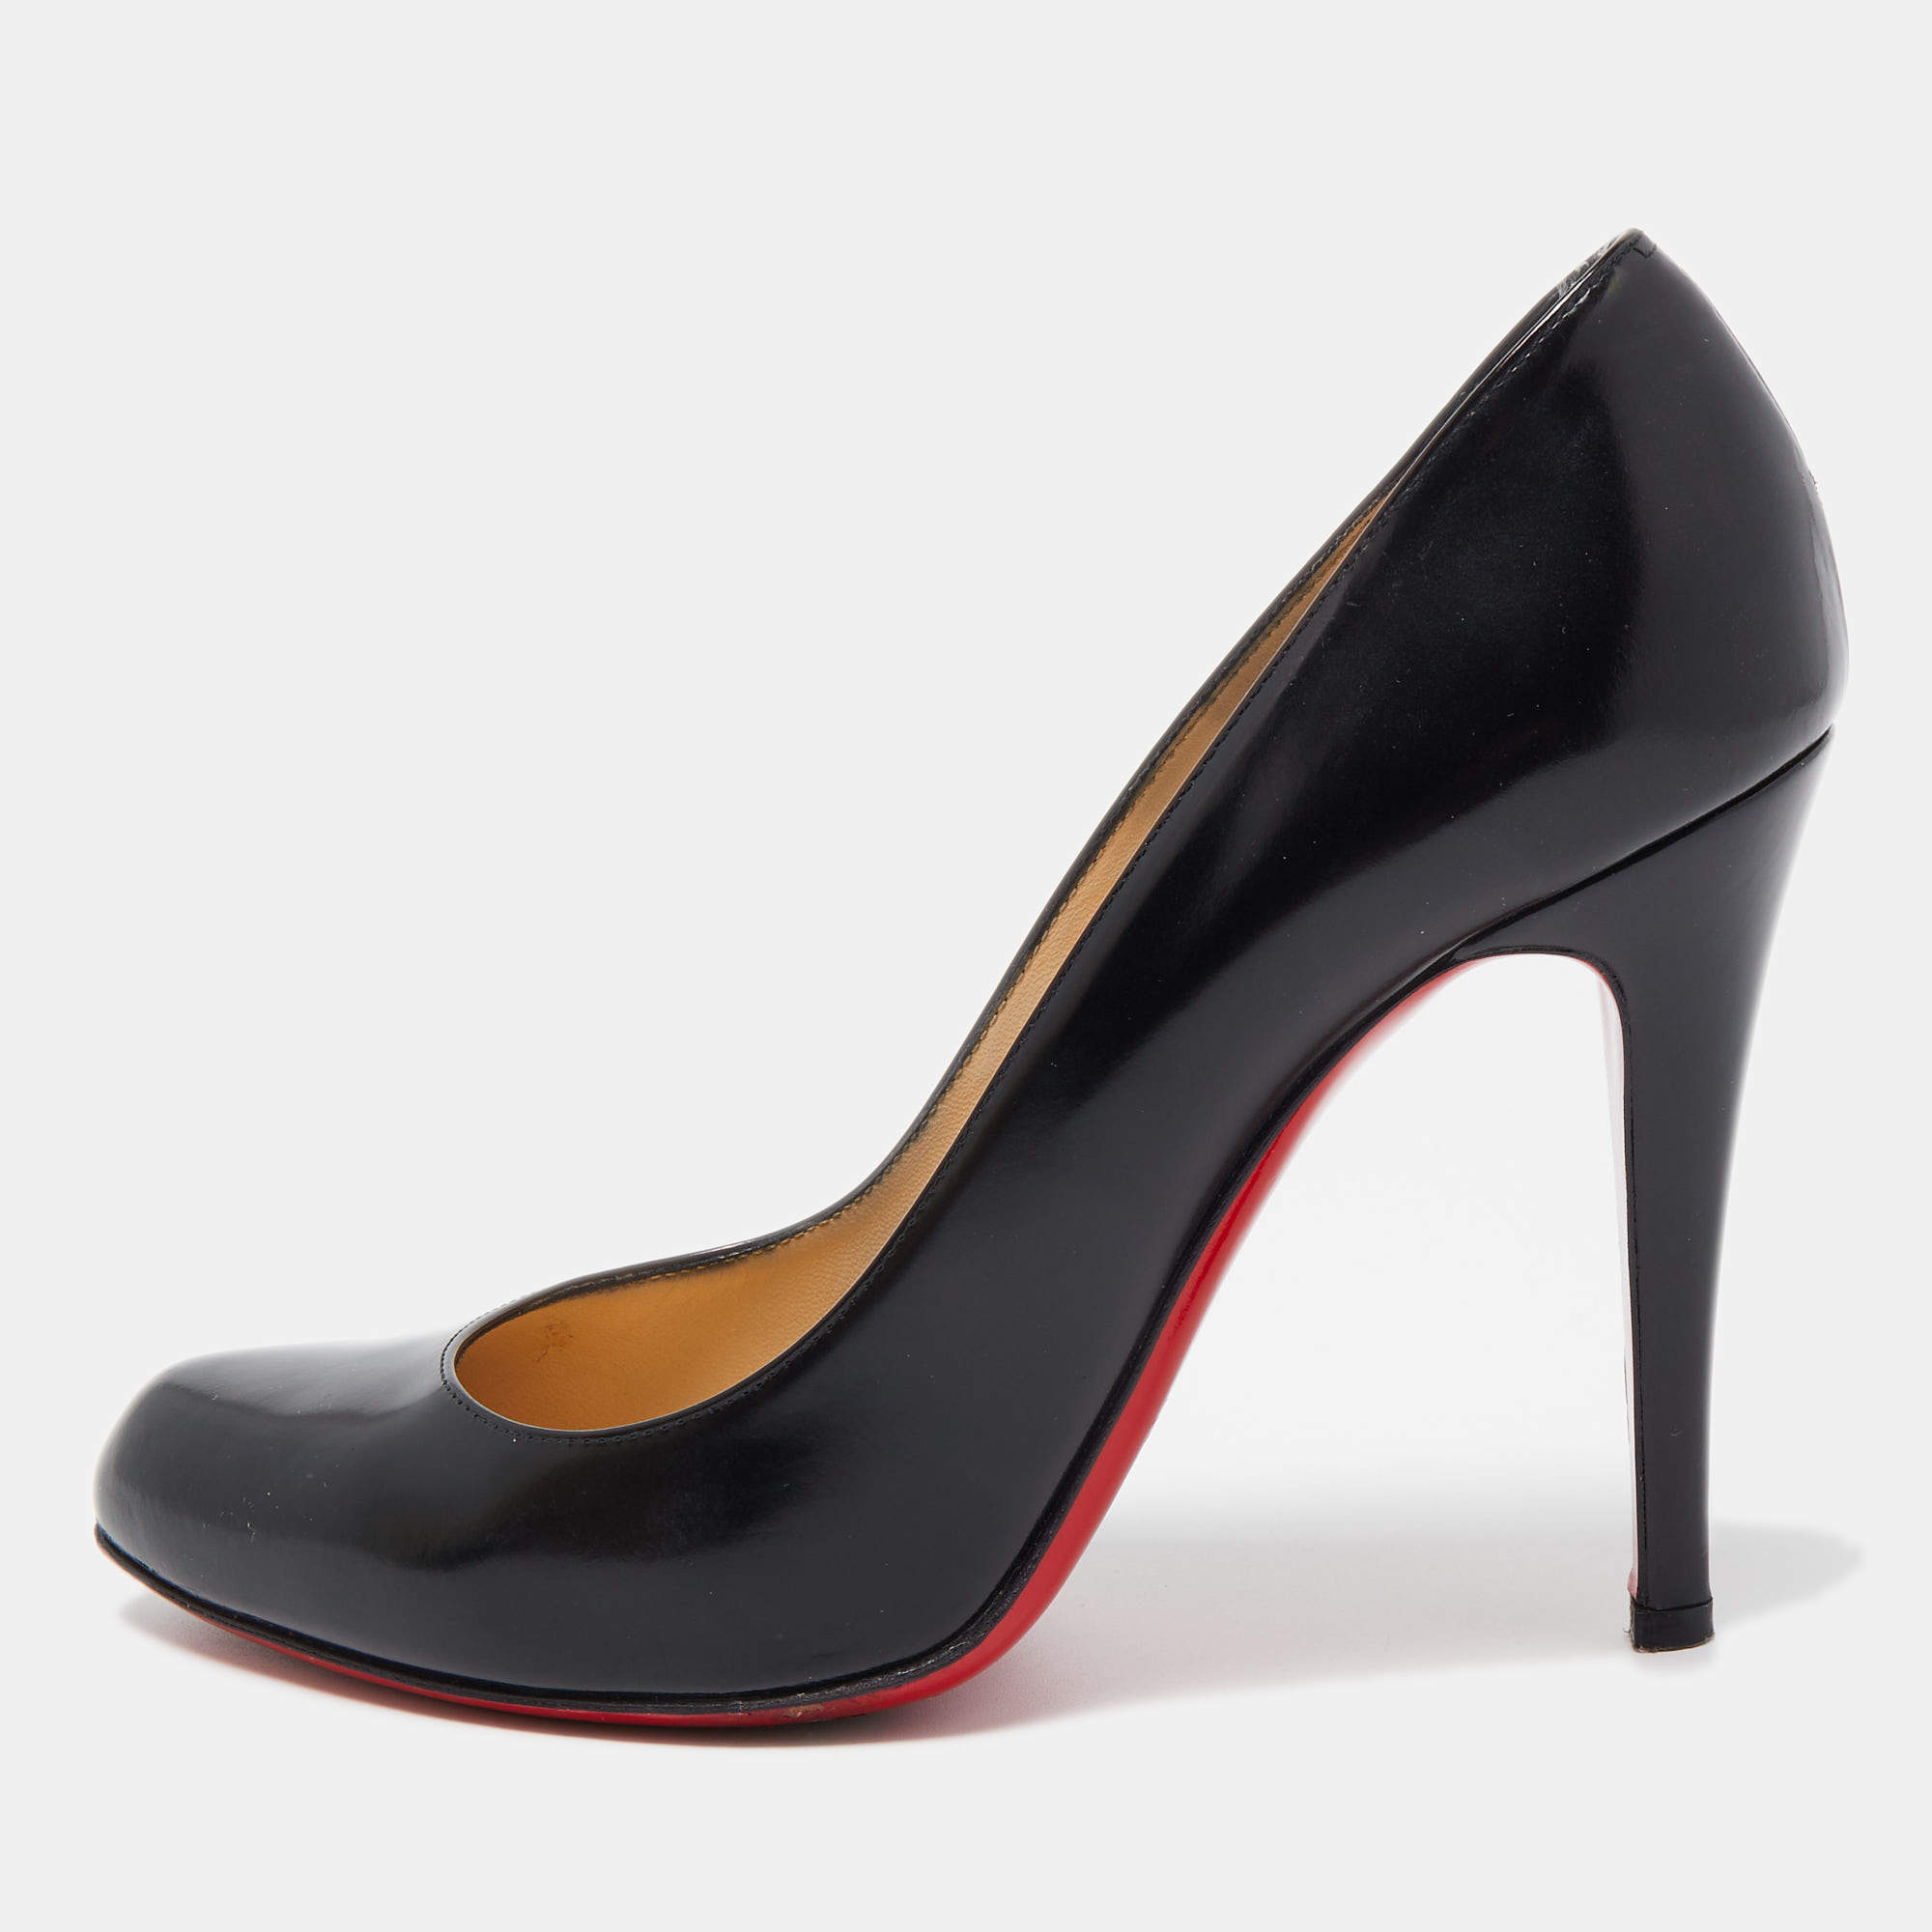 Christian Louboutin Black Leather Simple Pointed Toe Pumps Size 39.5